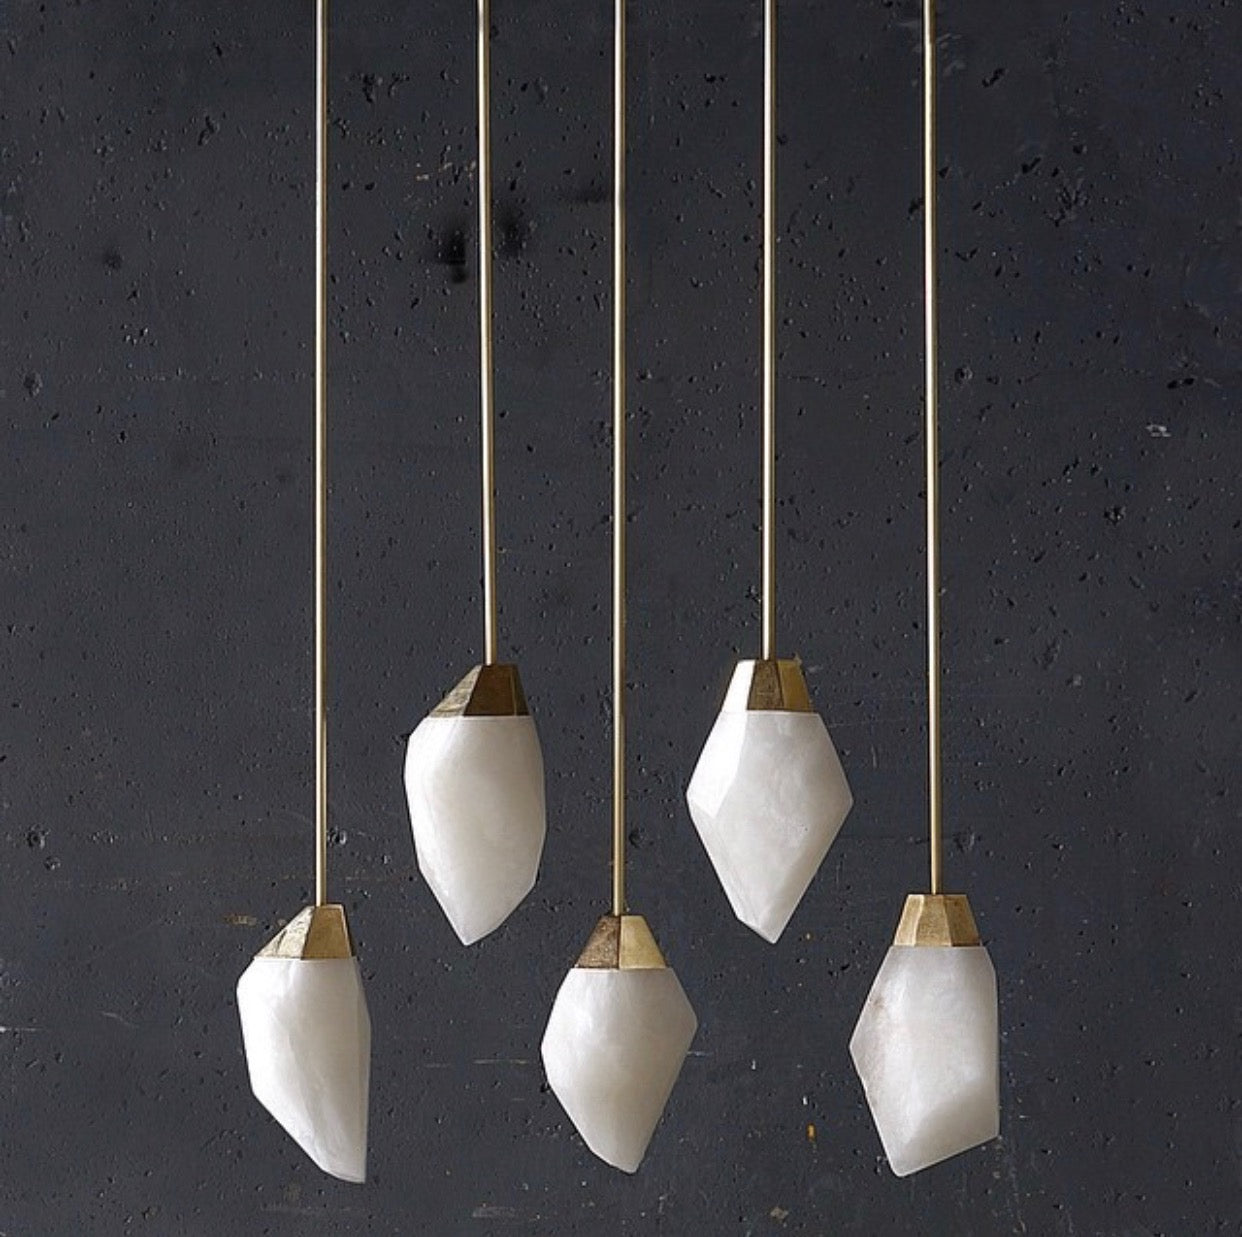 These alabaster faceted pendant lights have polished brass tops and are hung from brass pipes.